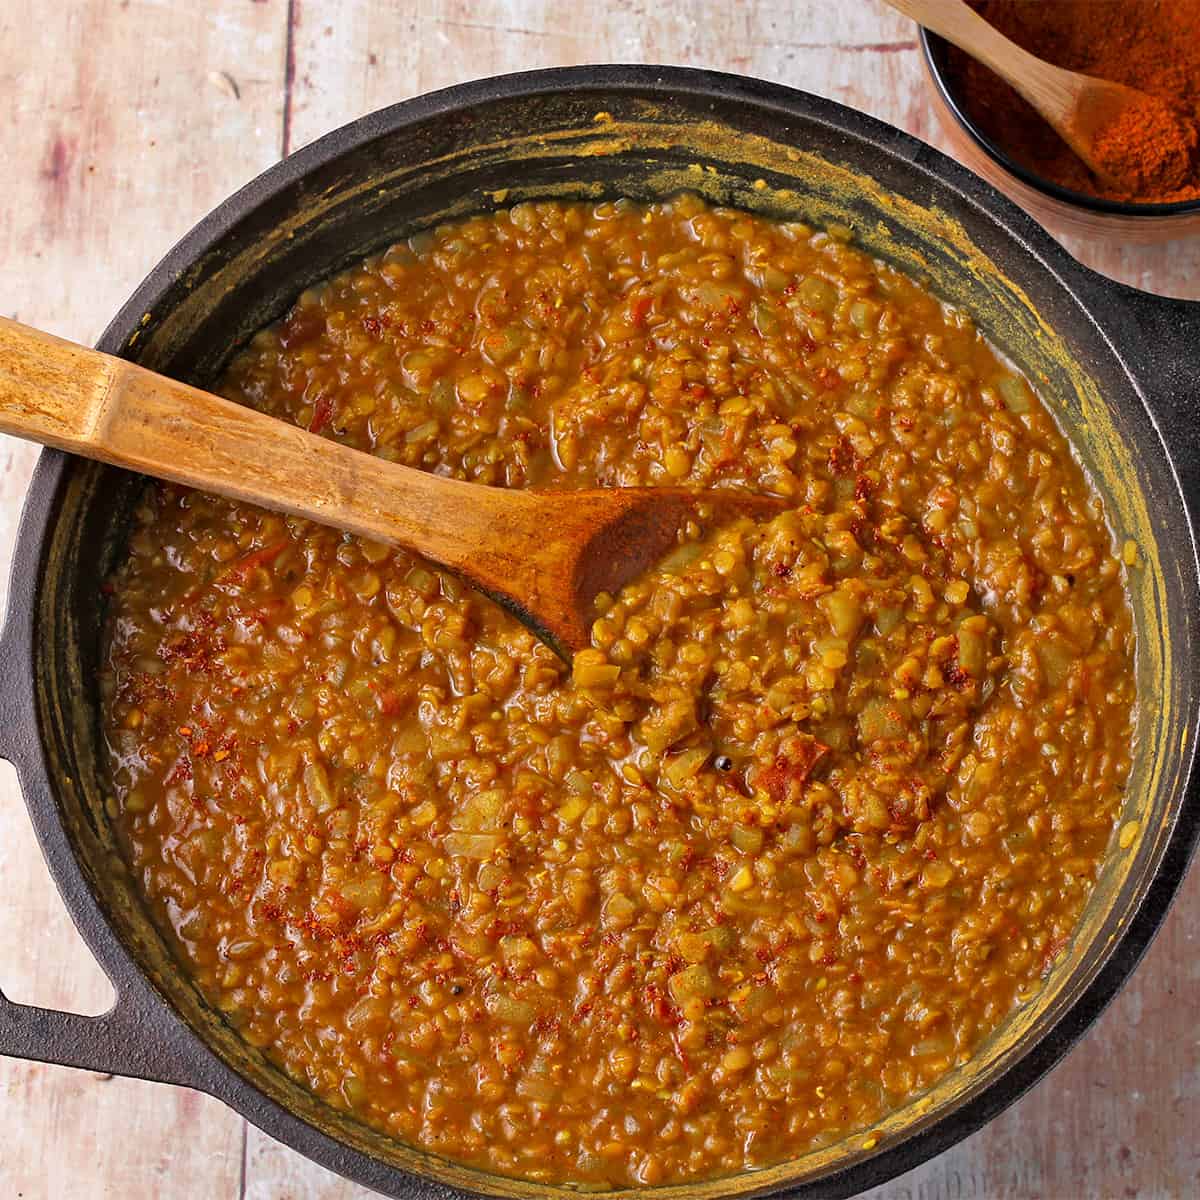 Misir Wot (Ethiopian Lentil stew) in a black pot with a wooden spoon